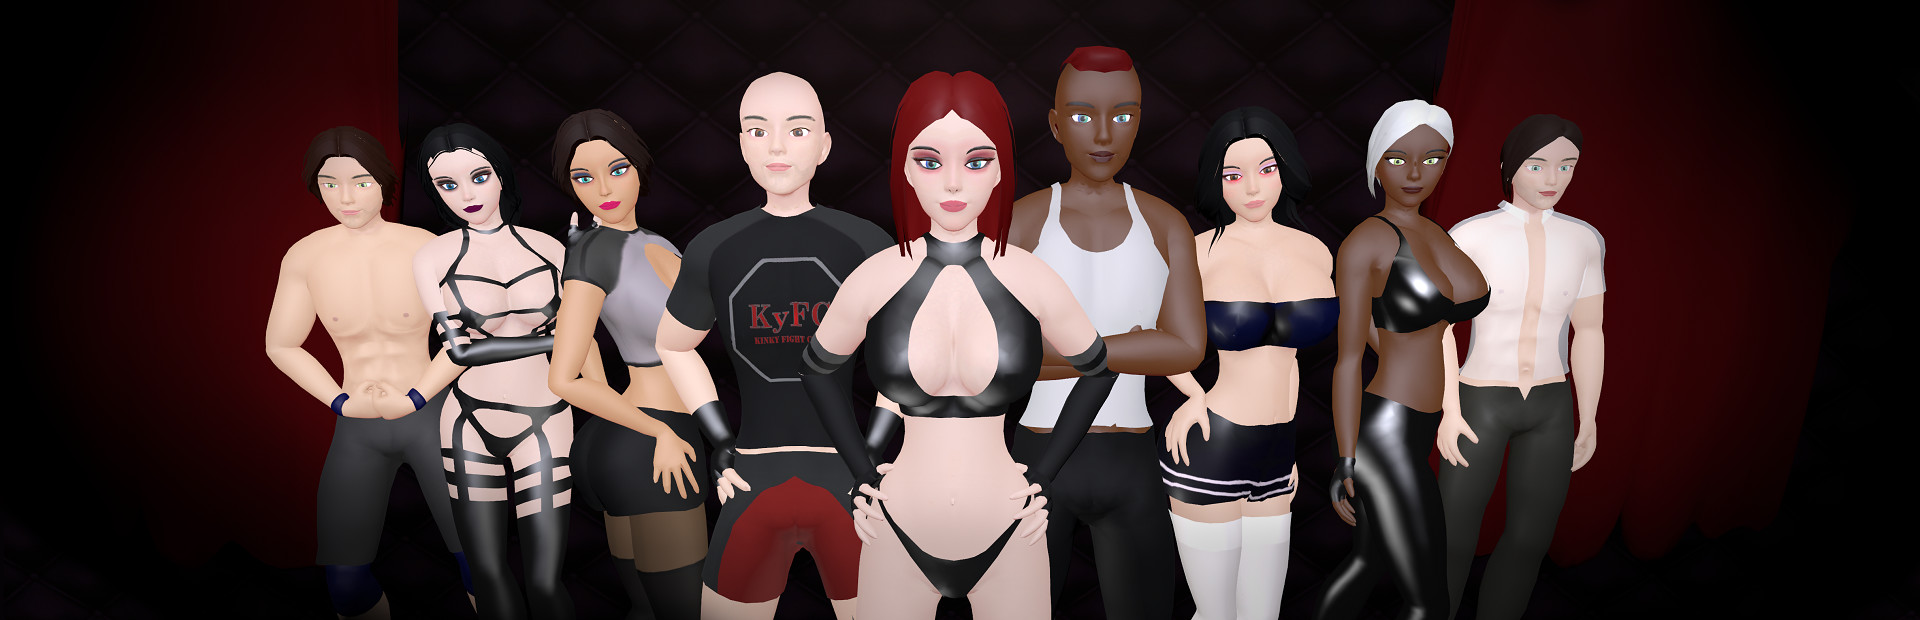 Kinky Fight Club cover image